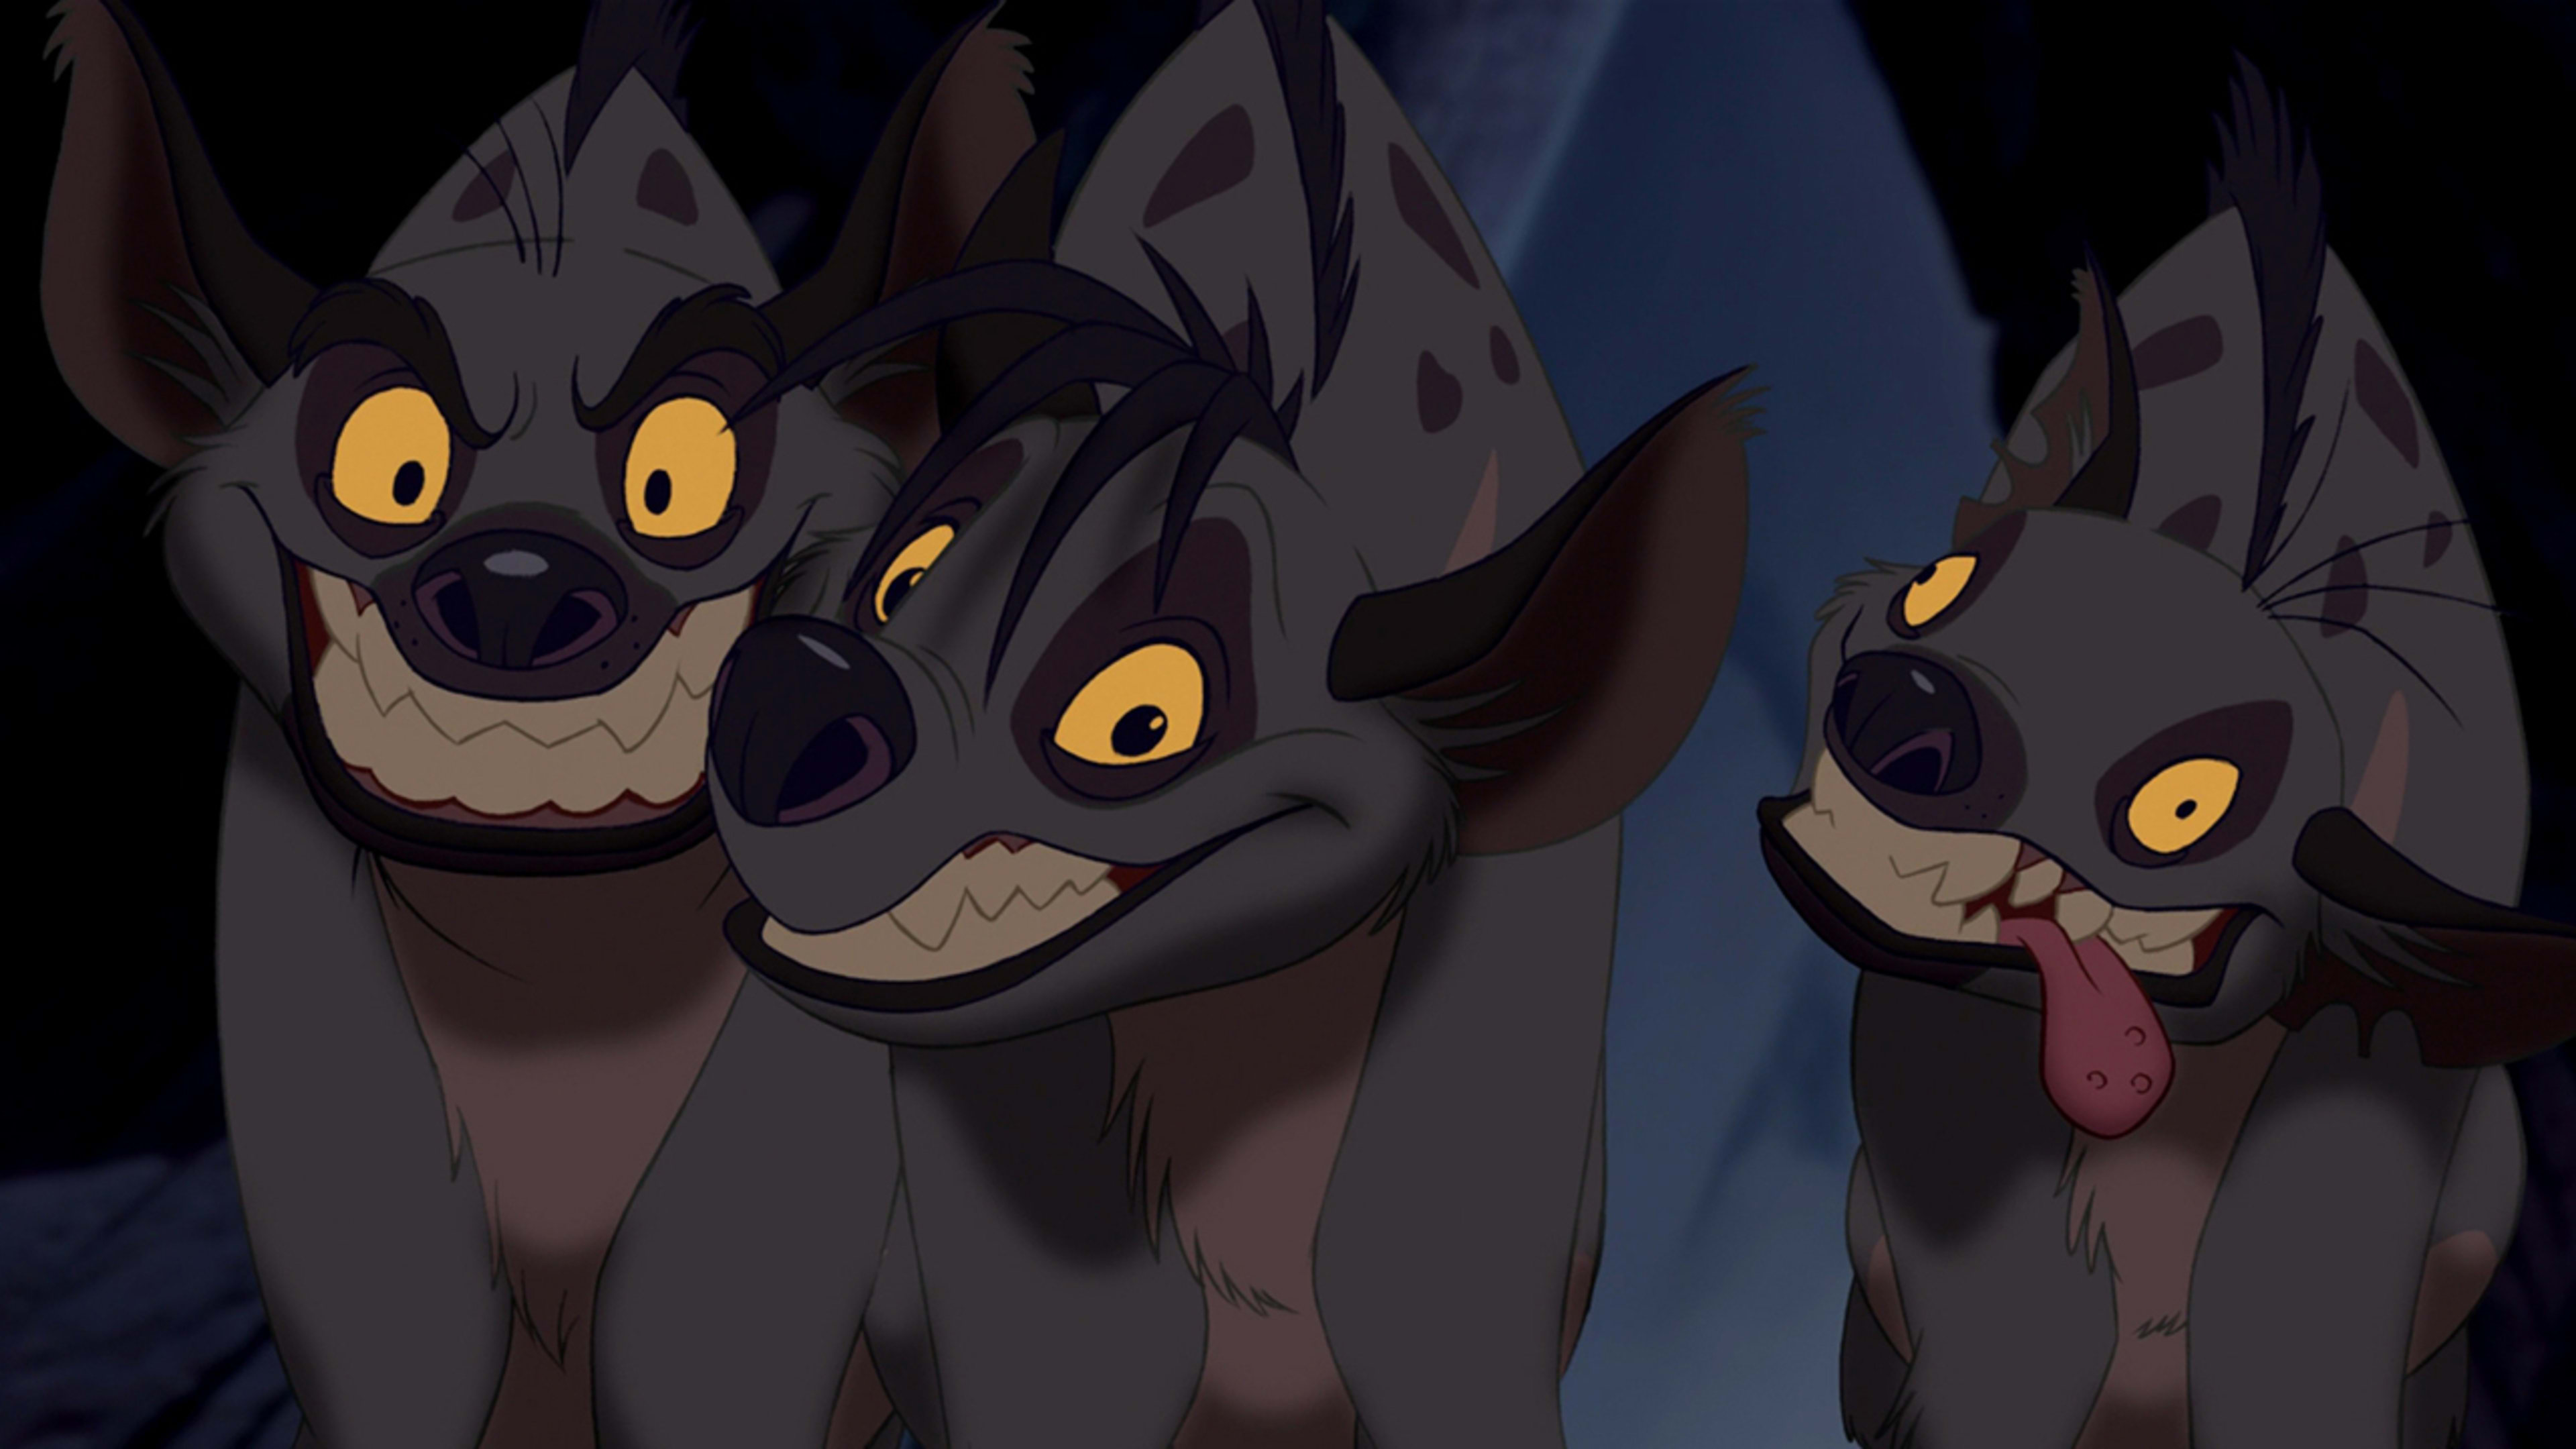 The original ‘Lion King’ had a racist hyenas problem. The new film fixes that, with mixed results.